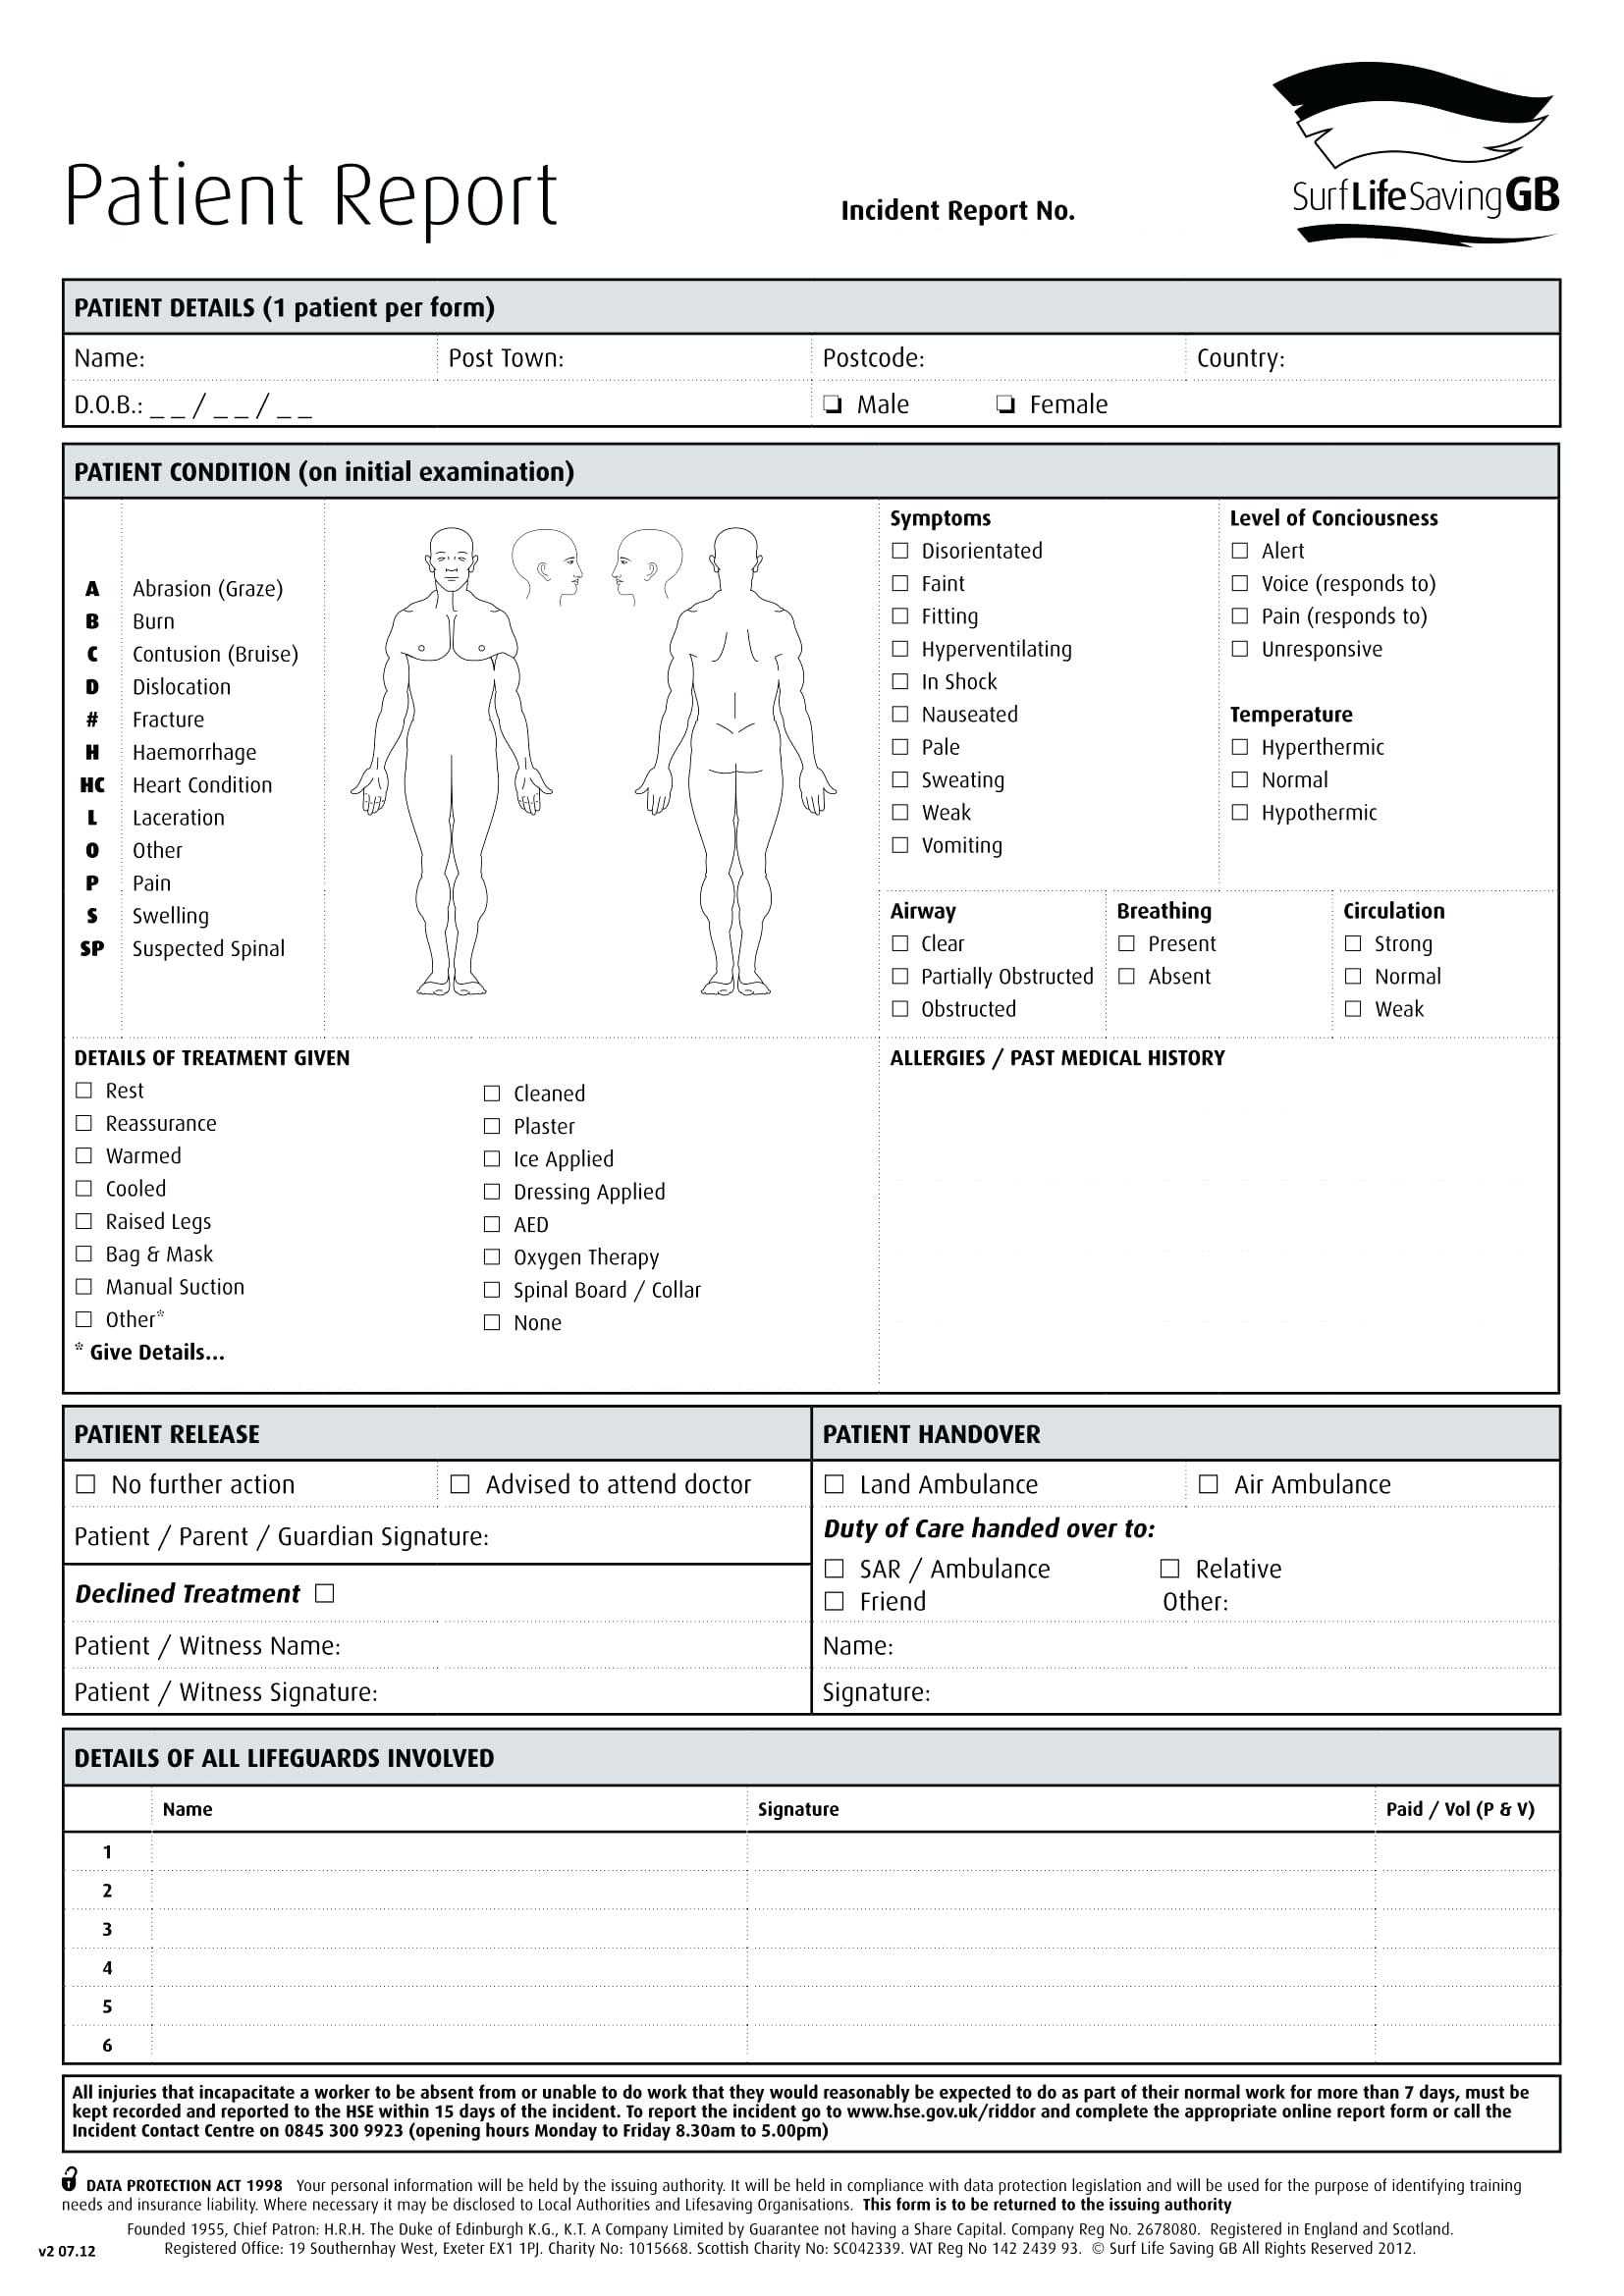 Incident Report Form Template Free Download – Vmarques Throughout Patient Report Form Template Download